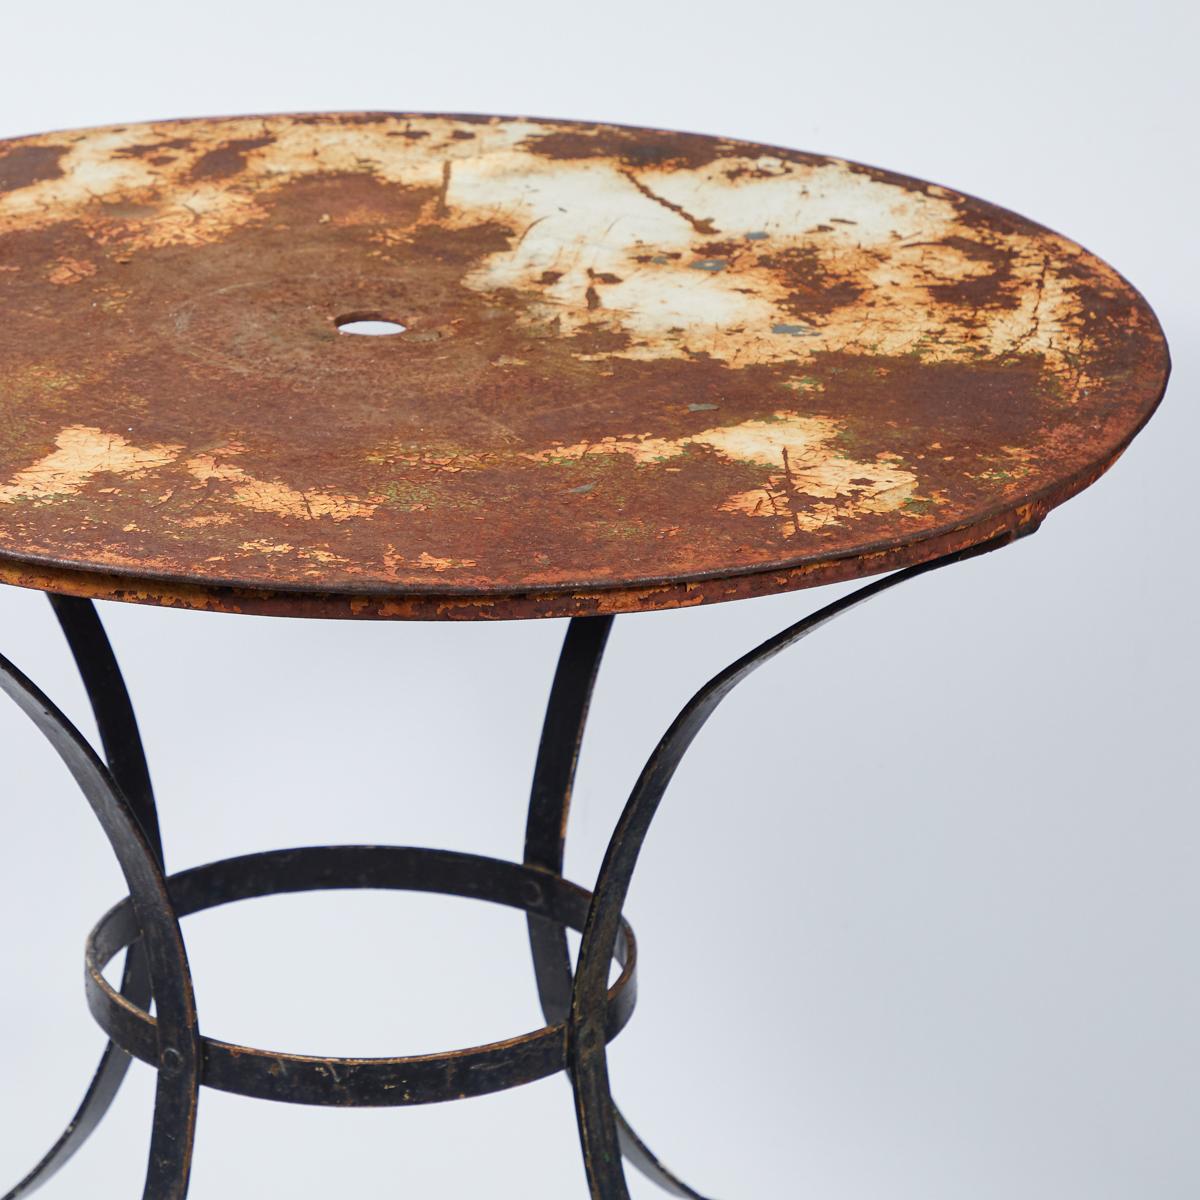 Early 20th-century English garden table with a round top showing traces of white paint. Set on a wrought-iron silhouette base, the piece a rustic, natural patina, and would make charming addition to any garden, patio, terrace, or outdoor space.